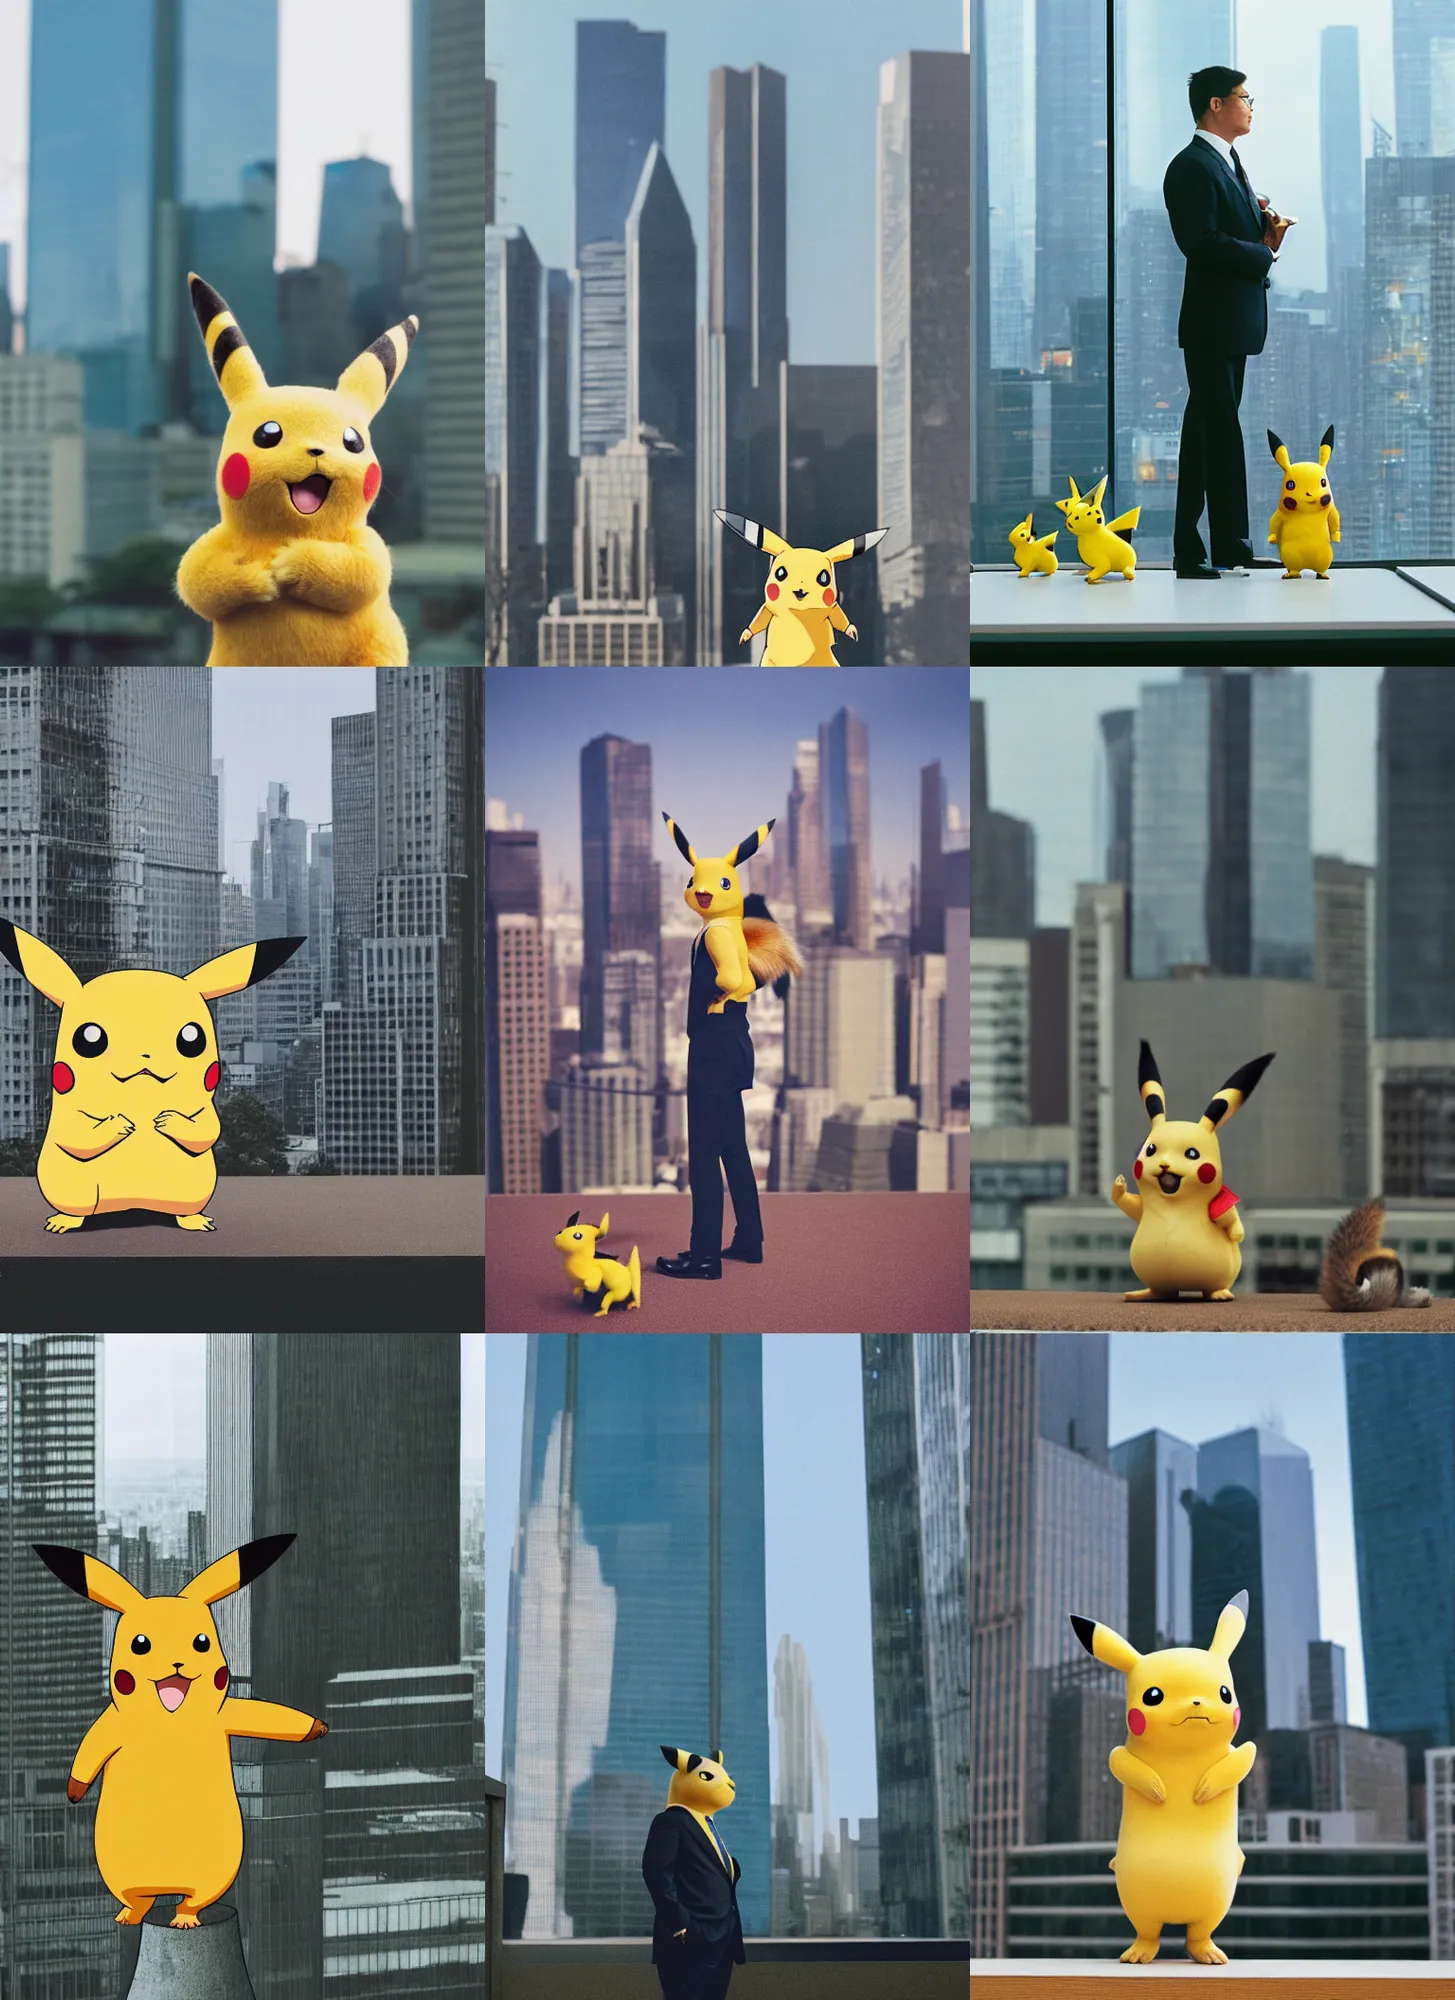 Prompt: medium format film photography of pikachu standing in a business suit at a meeting with squirrels in a skyscraper office with a city view in the background, hasselblad film, soft light photographed on colour expired film